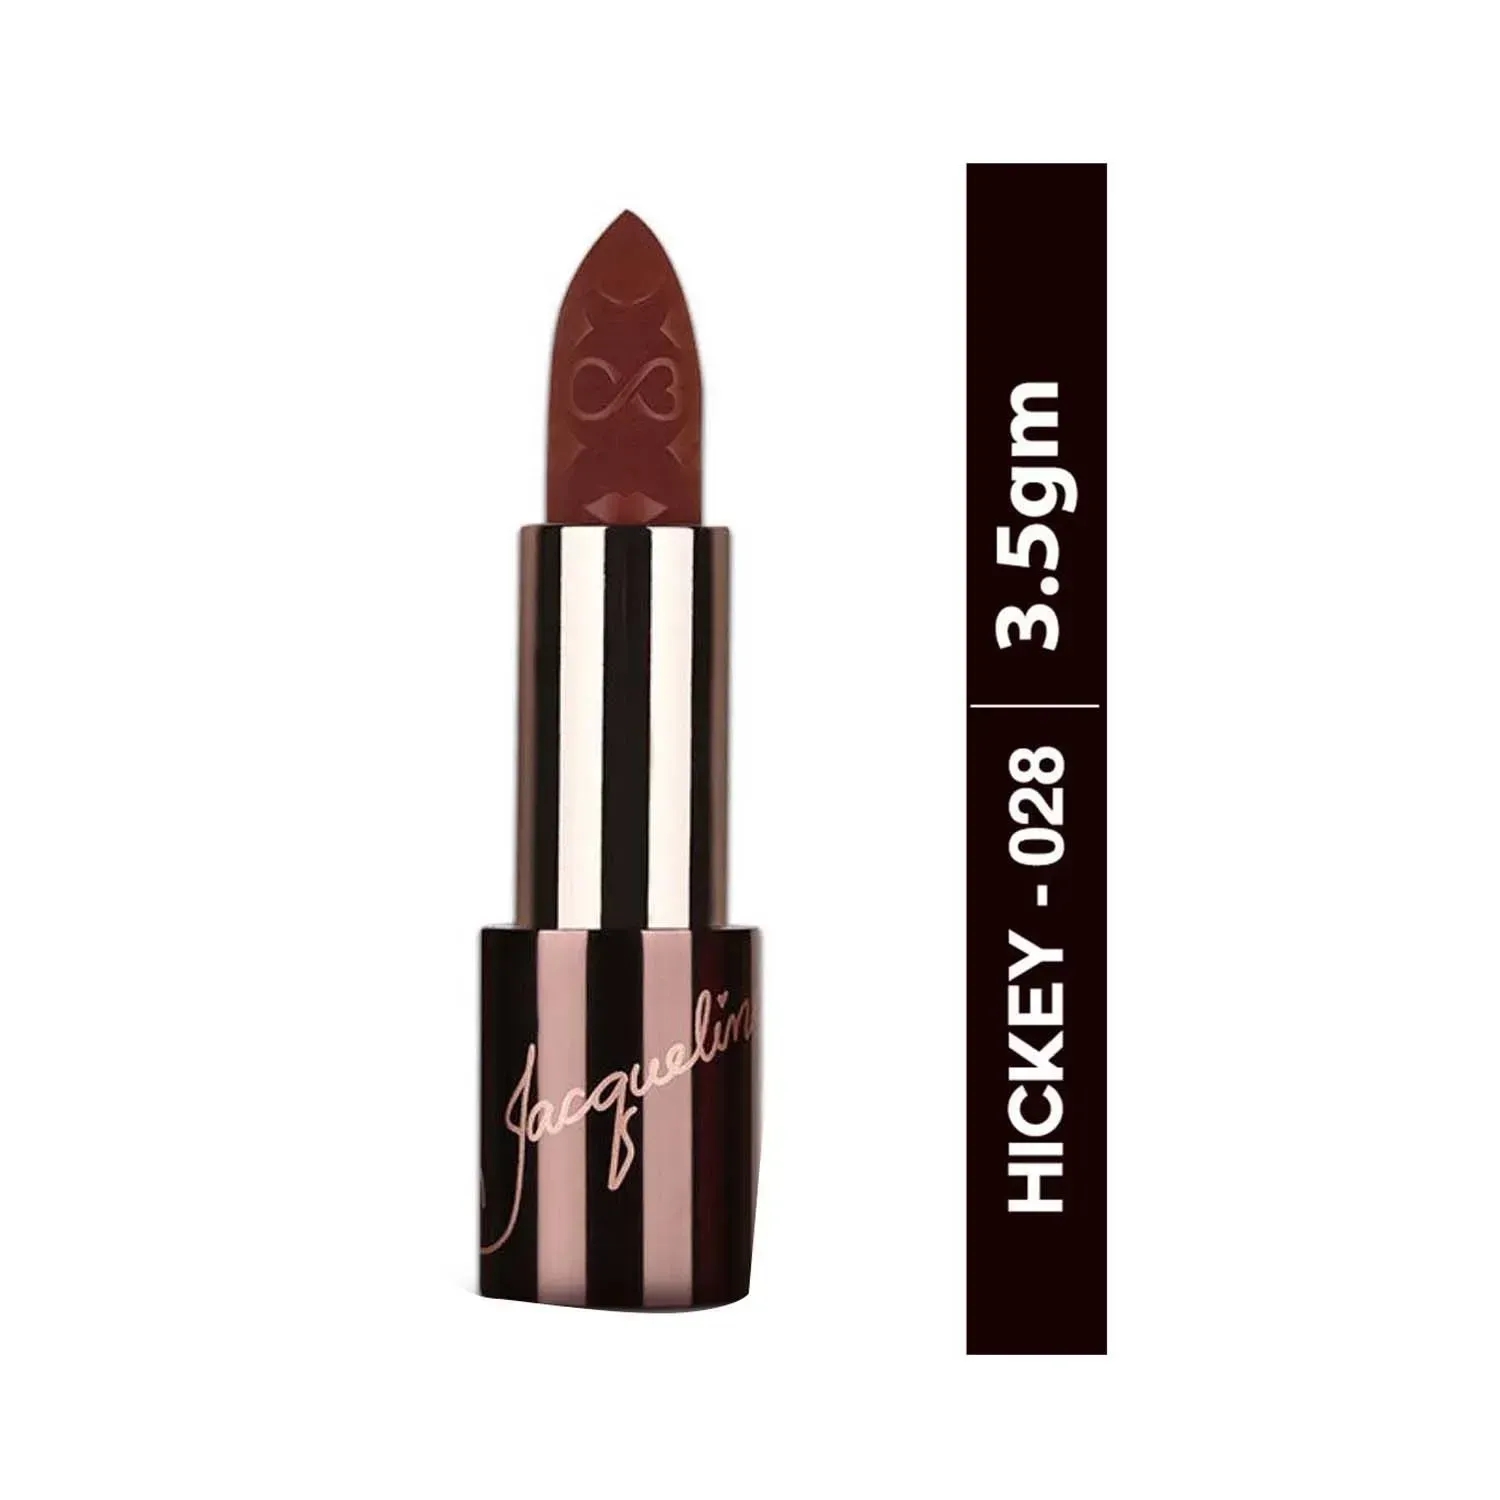 Colorbar | Colorbar X Jacqueline Sinful Matte Lipcolor - 028 Hickey (3.5g)